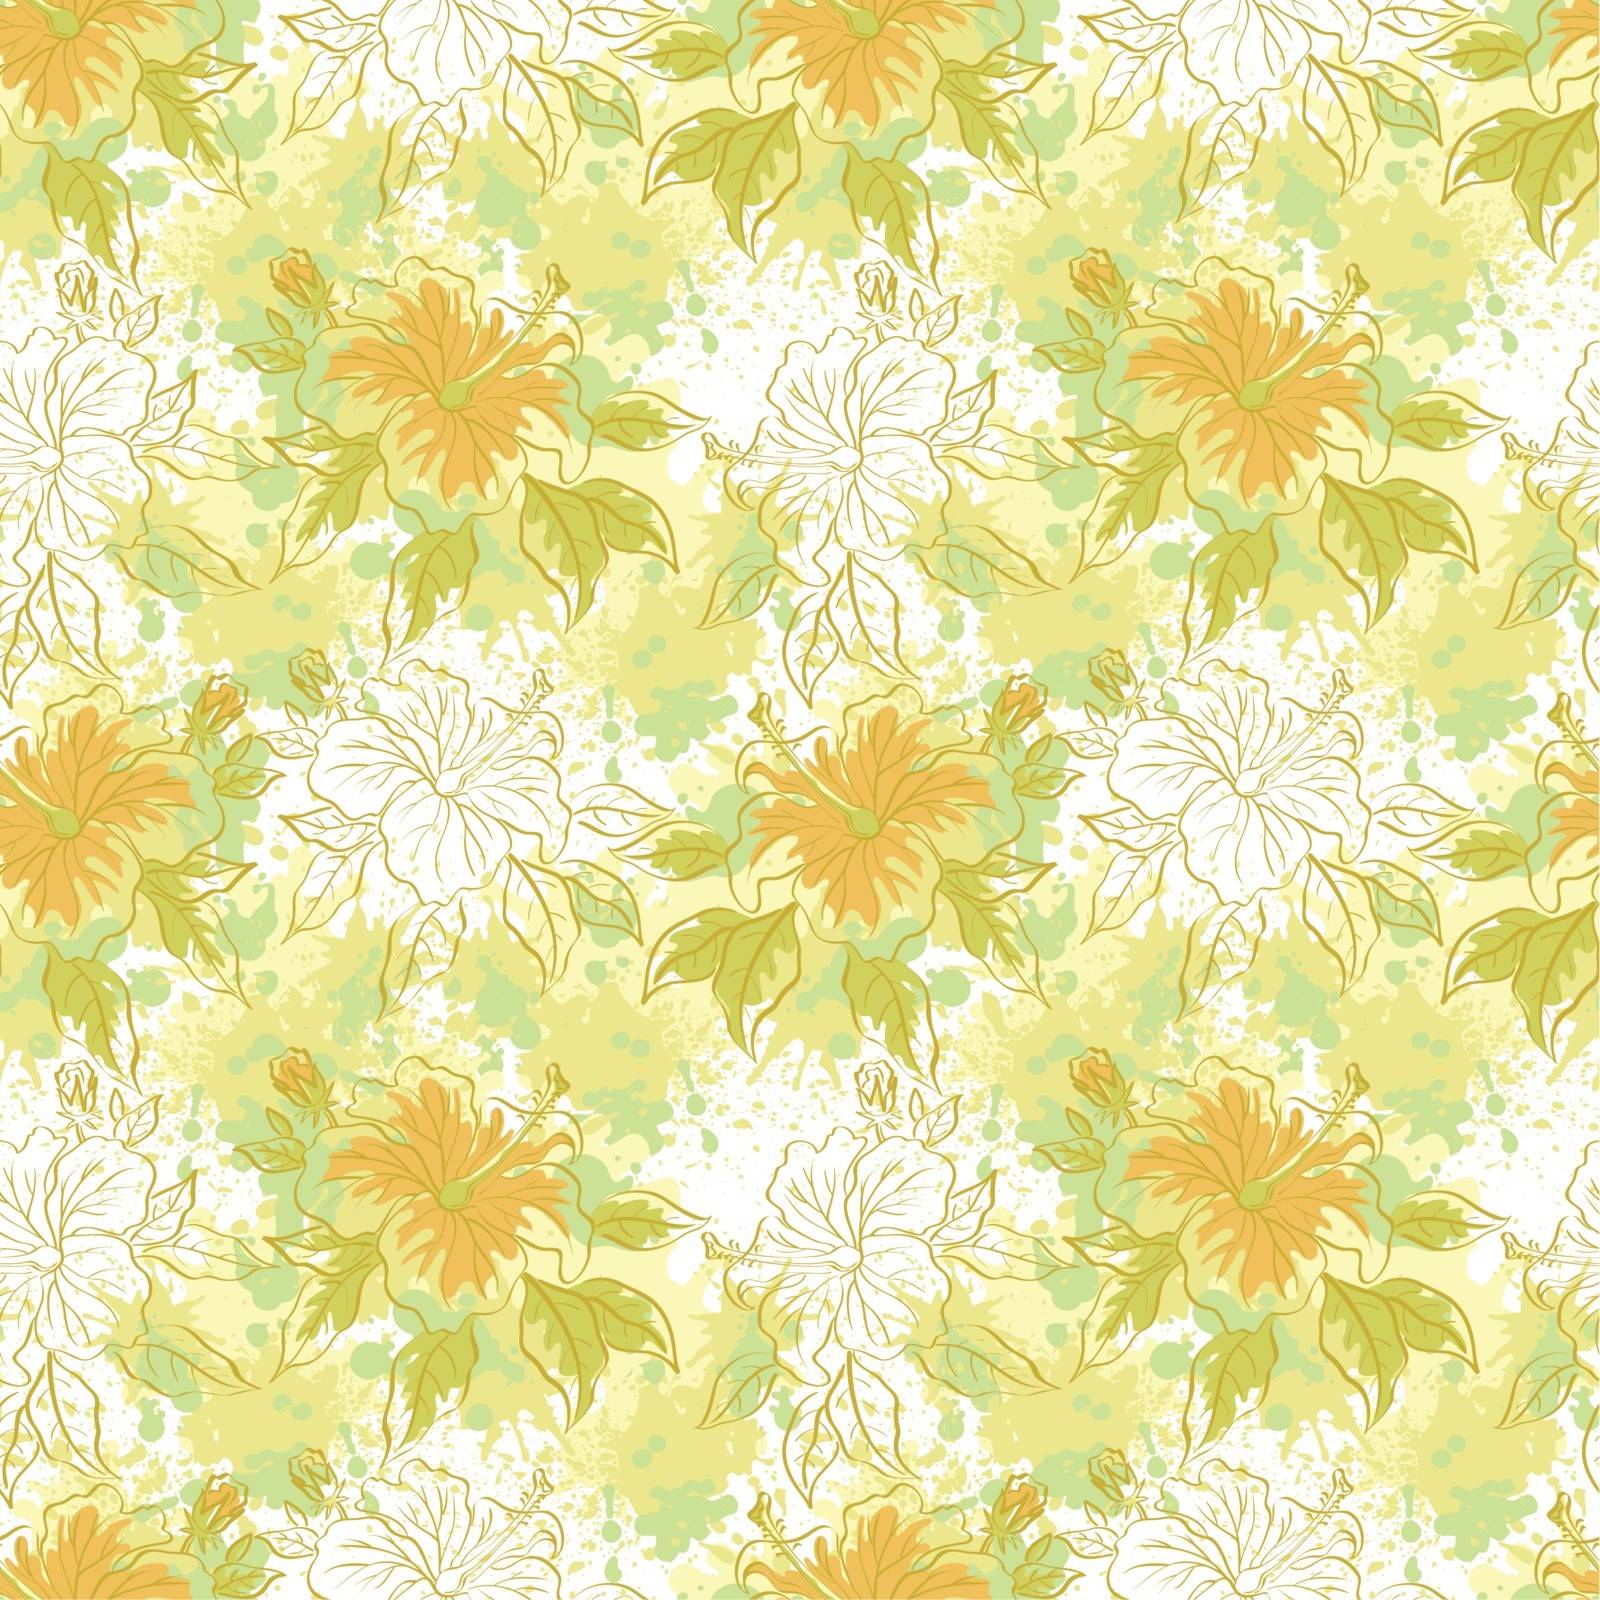 Seamless floral background by alexcoolok